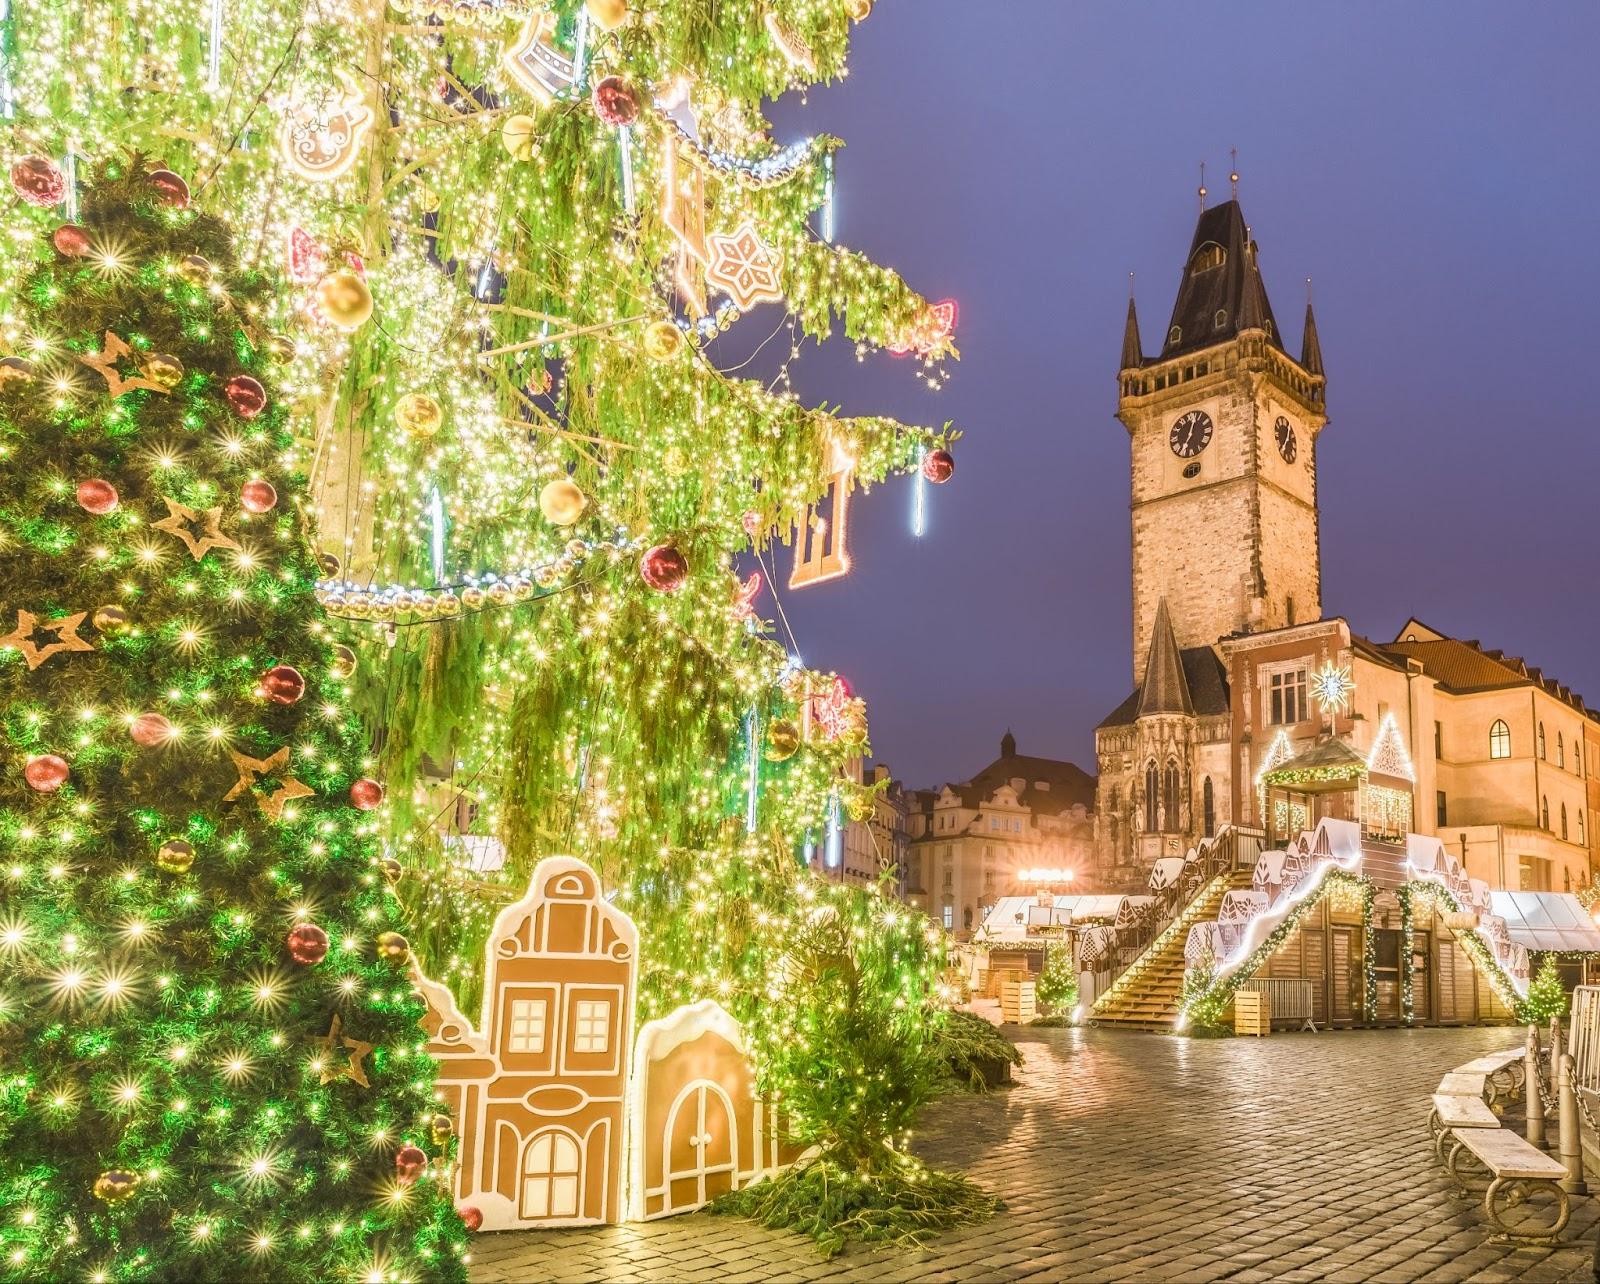 Christmas market in Prague decorated with Christmas trees.
